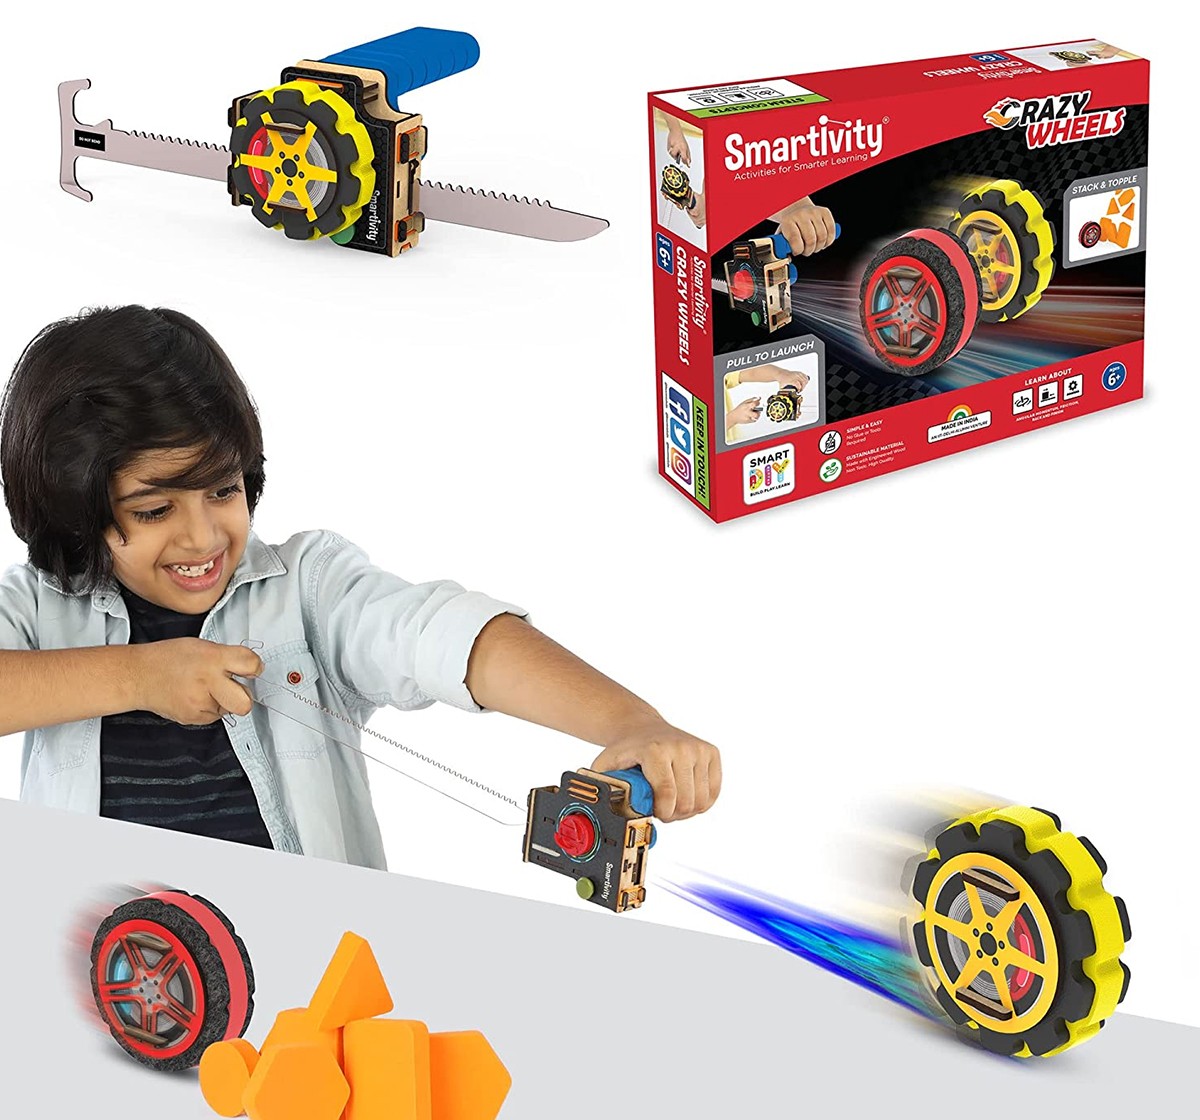 Smartivity Crazy Wheels STEM DIY Fun Toys, Spin Speed - 1800 RPM, Fast Speed, for Kids 6 to 14yrs
